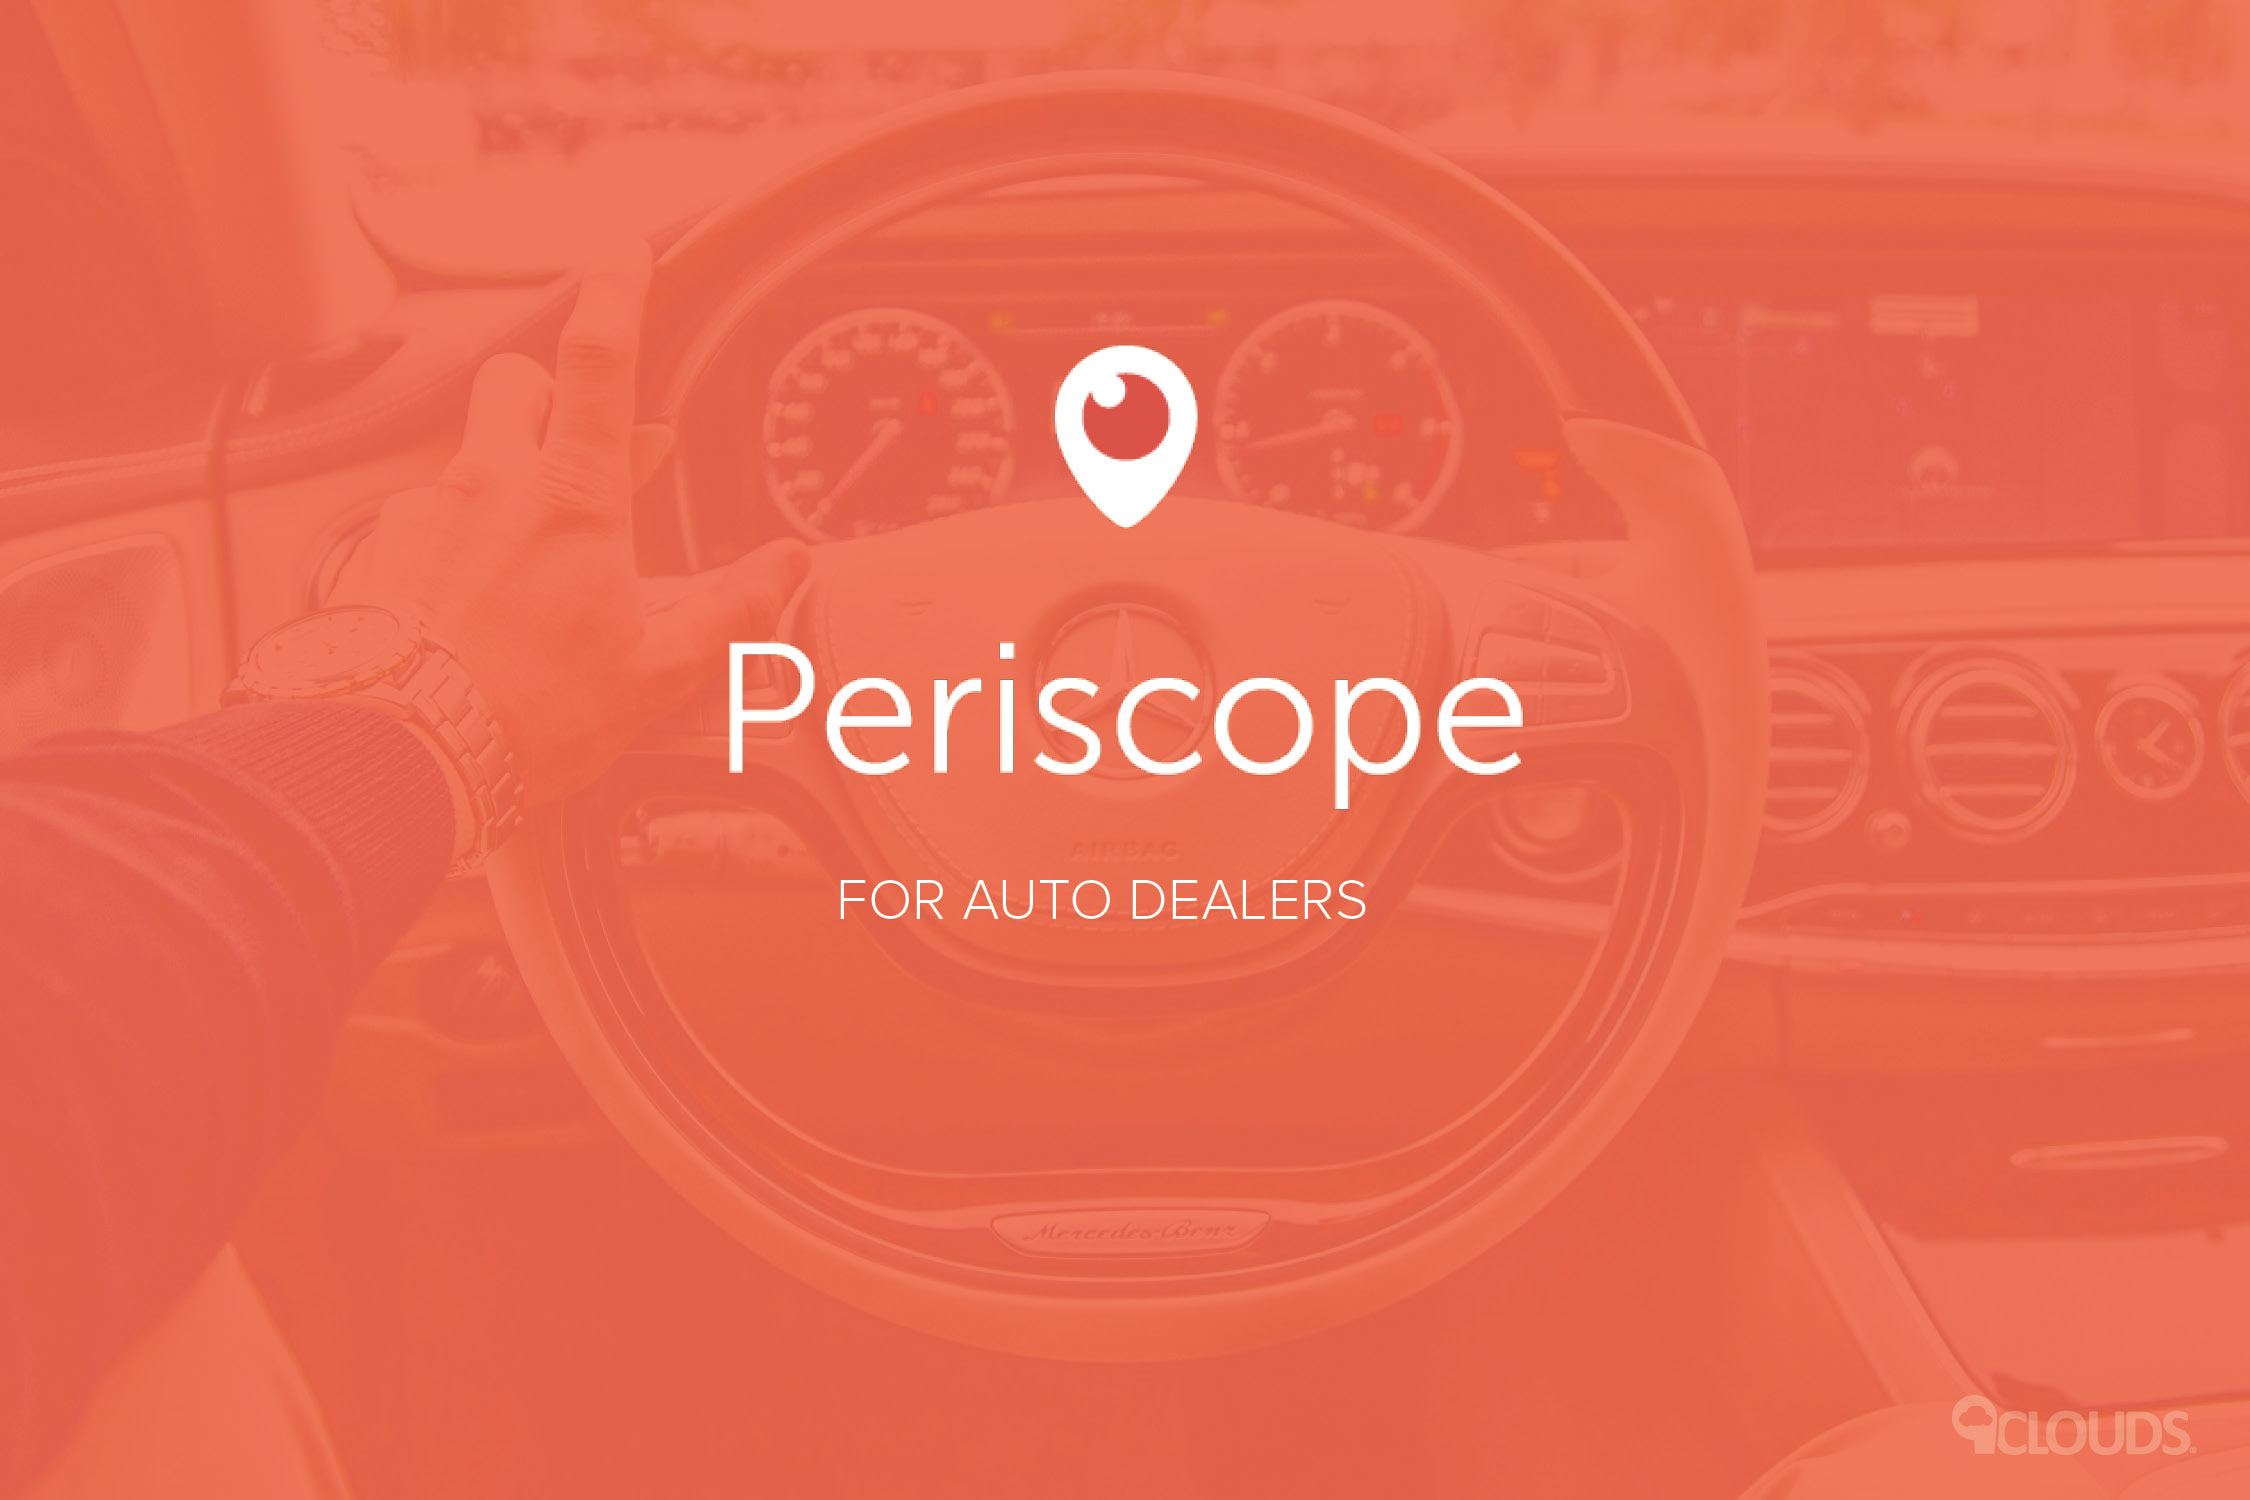 Periscope for Auto Dealers: What, Why, and How